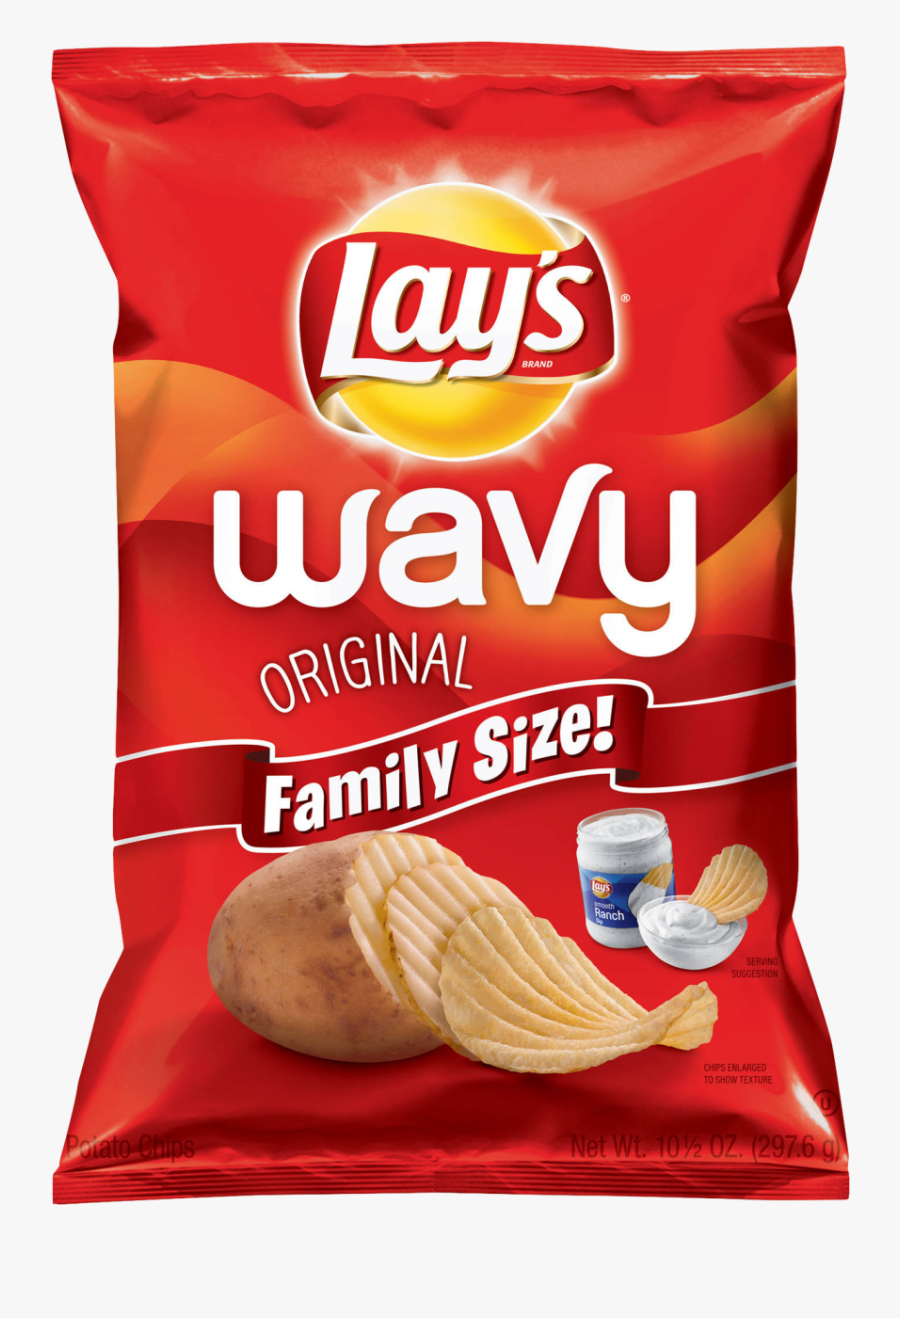 Lays Classic Potato Chips Packet Png Image - Lays Packet Png, Transparent Clipart